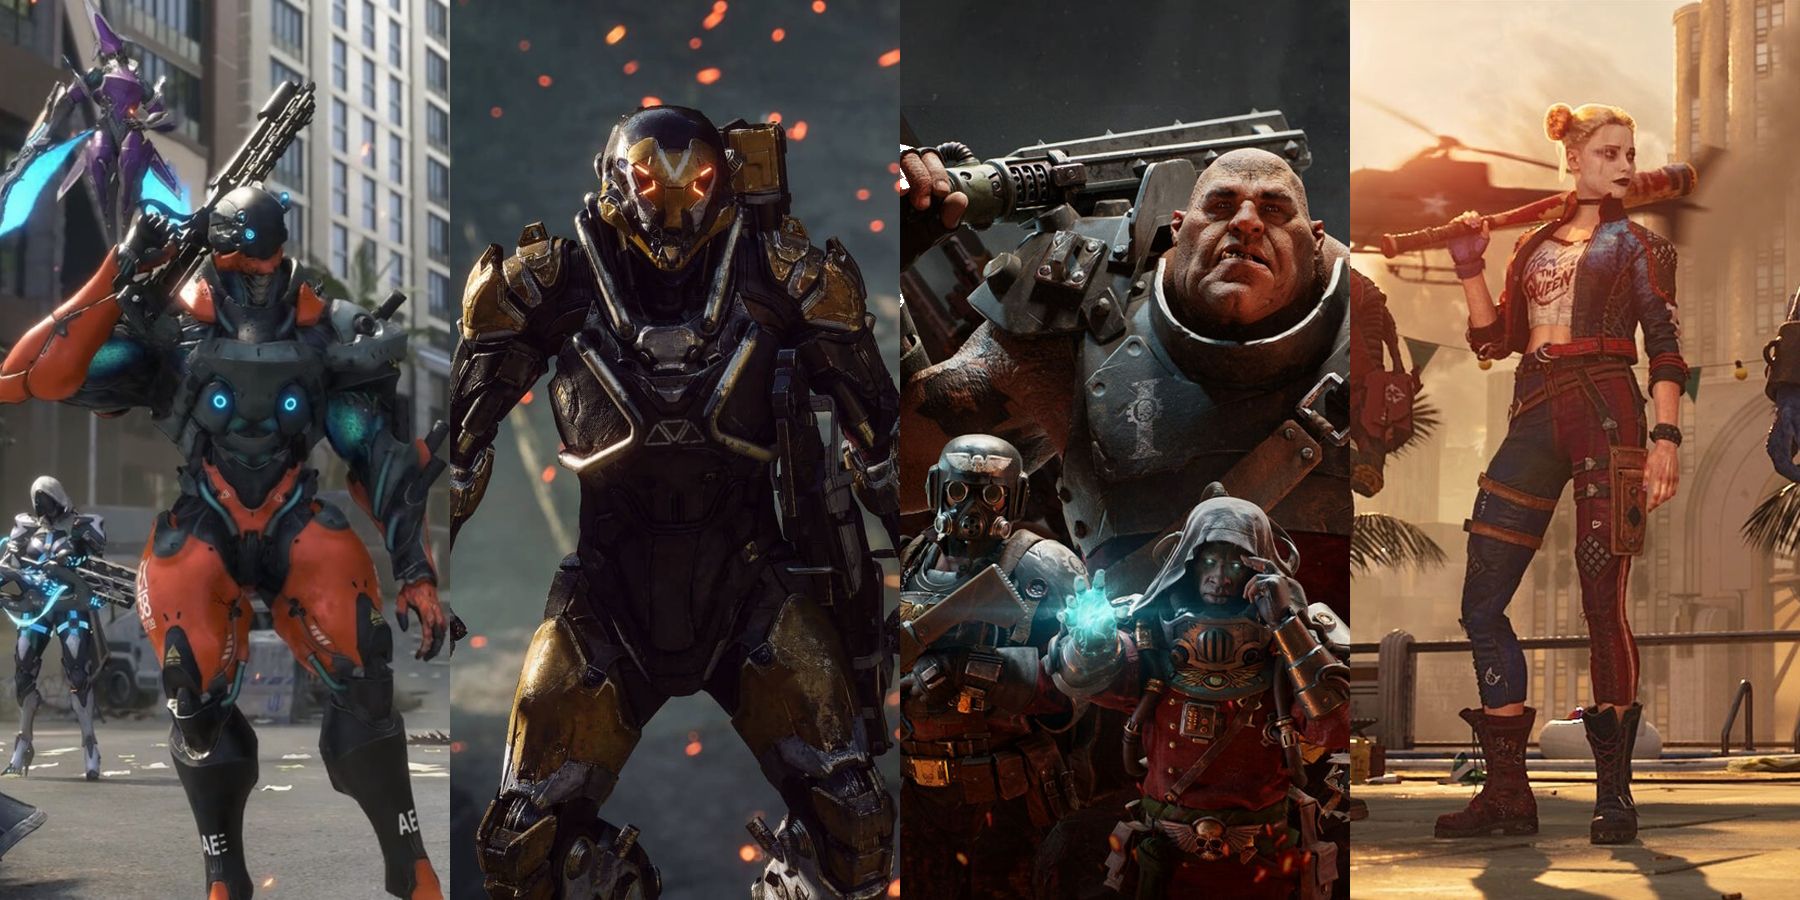 Characters from live-service games Exoprimal, Anthem, Warhammer 40k Darktide, and Suicide Squad: Kill the Justice League